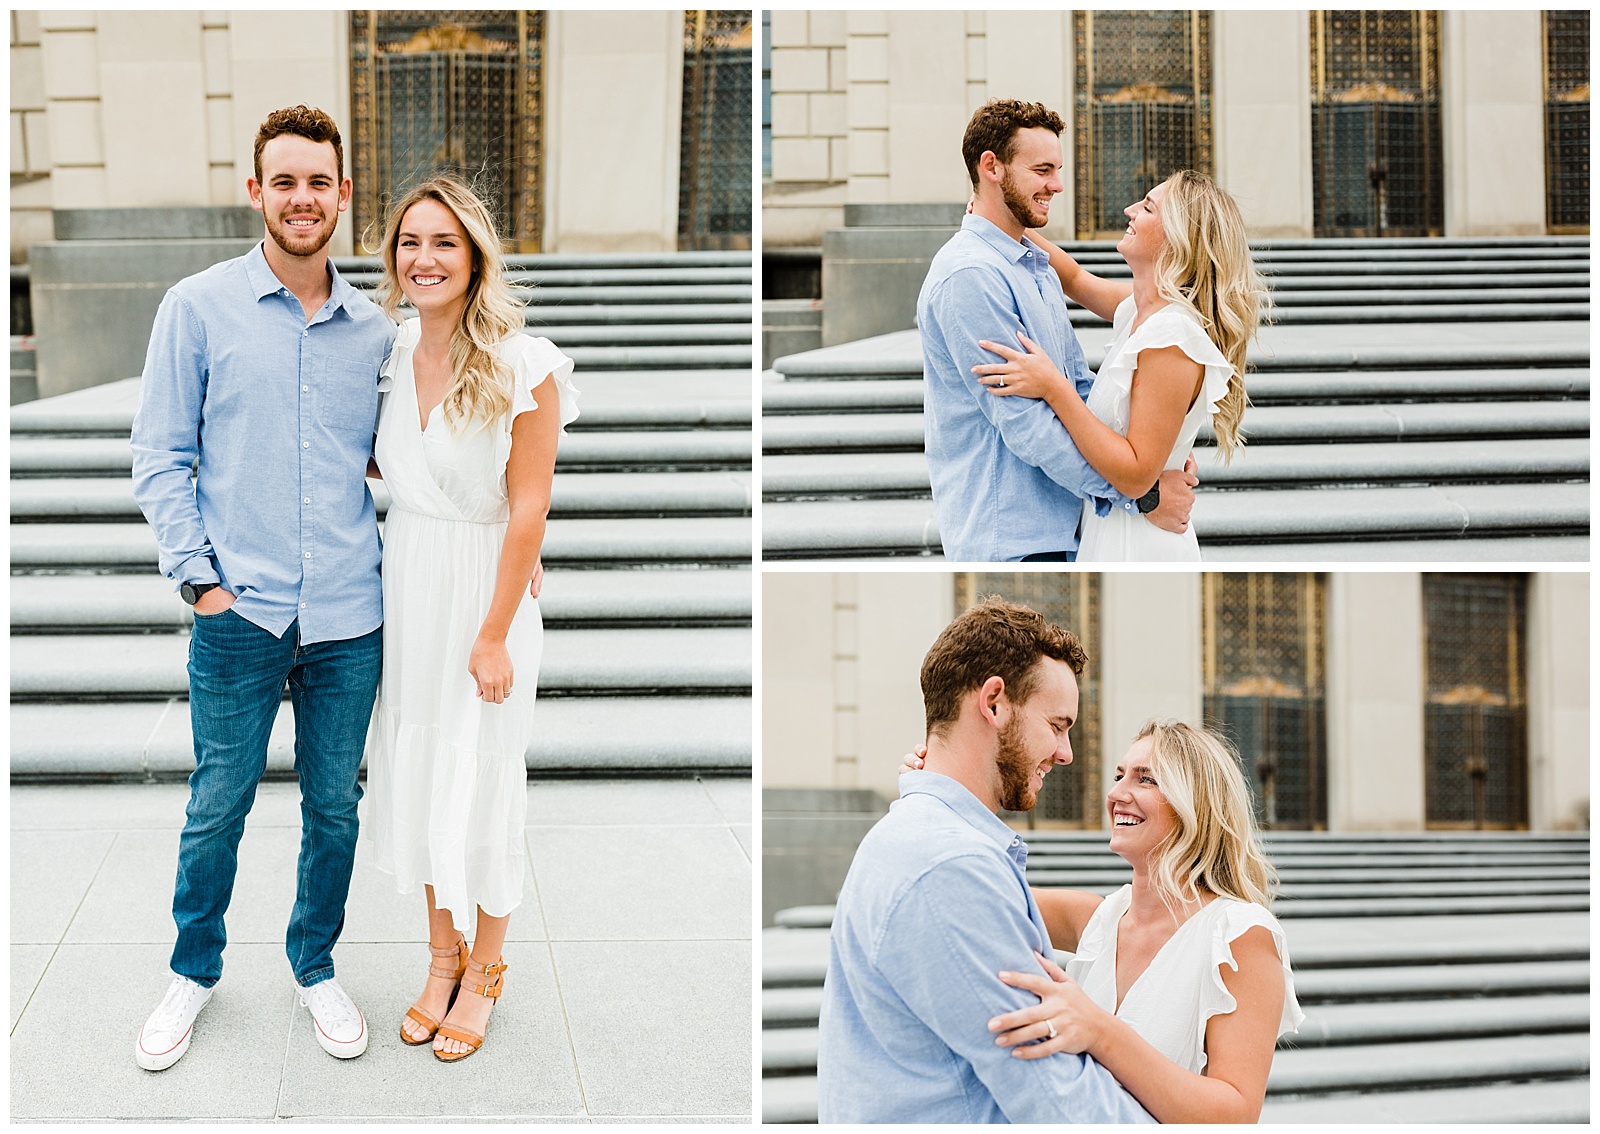 downtown Indianapolis Engagement Session, Indianapolis engagement photos, Indianapolis engagement photographer, war memorial indianapolis, Irvington engagement session, Indianapolis wedding photographer, Black Acre Beer Garden, engagement pictures Indianapolis